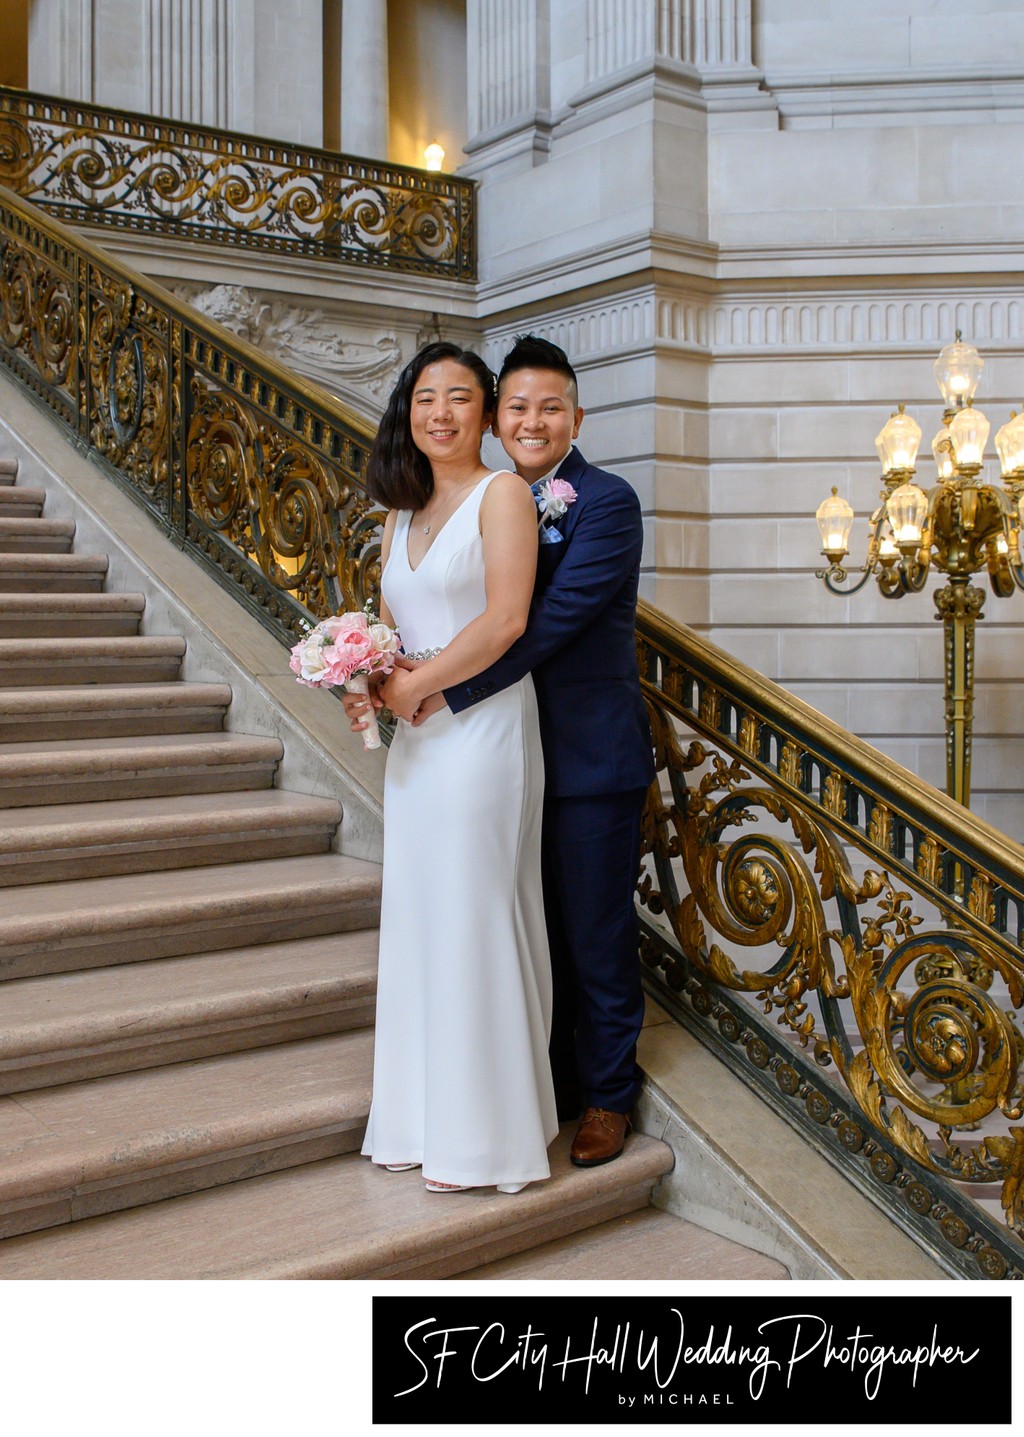 LGBTQ+ couple on the grand staircase